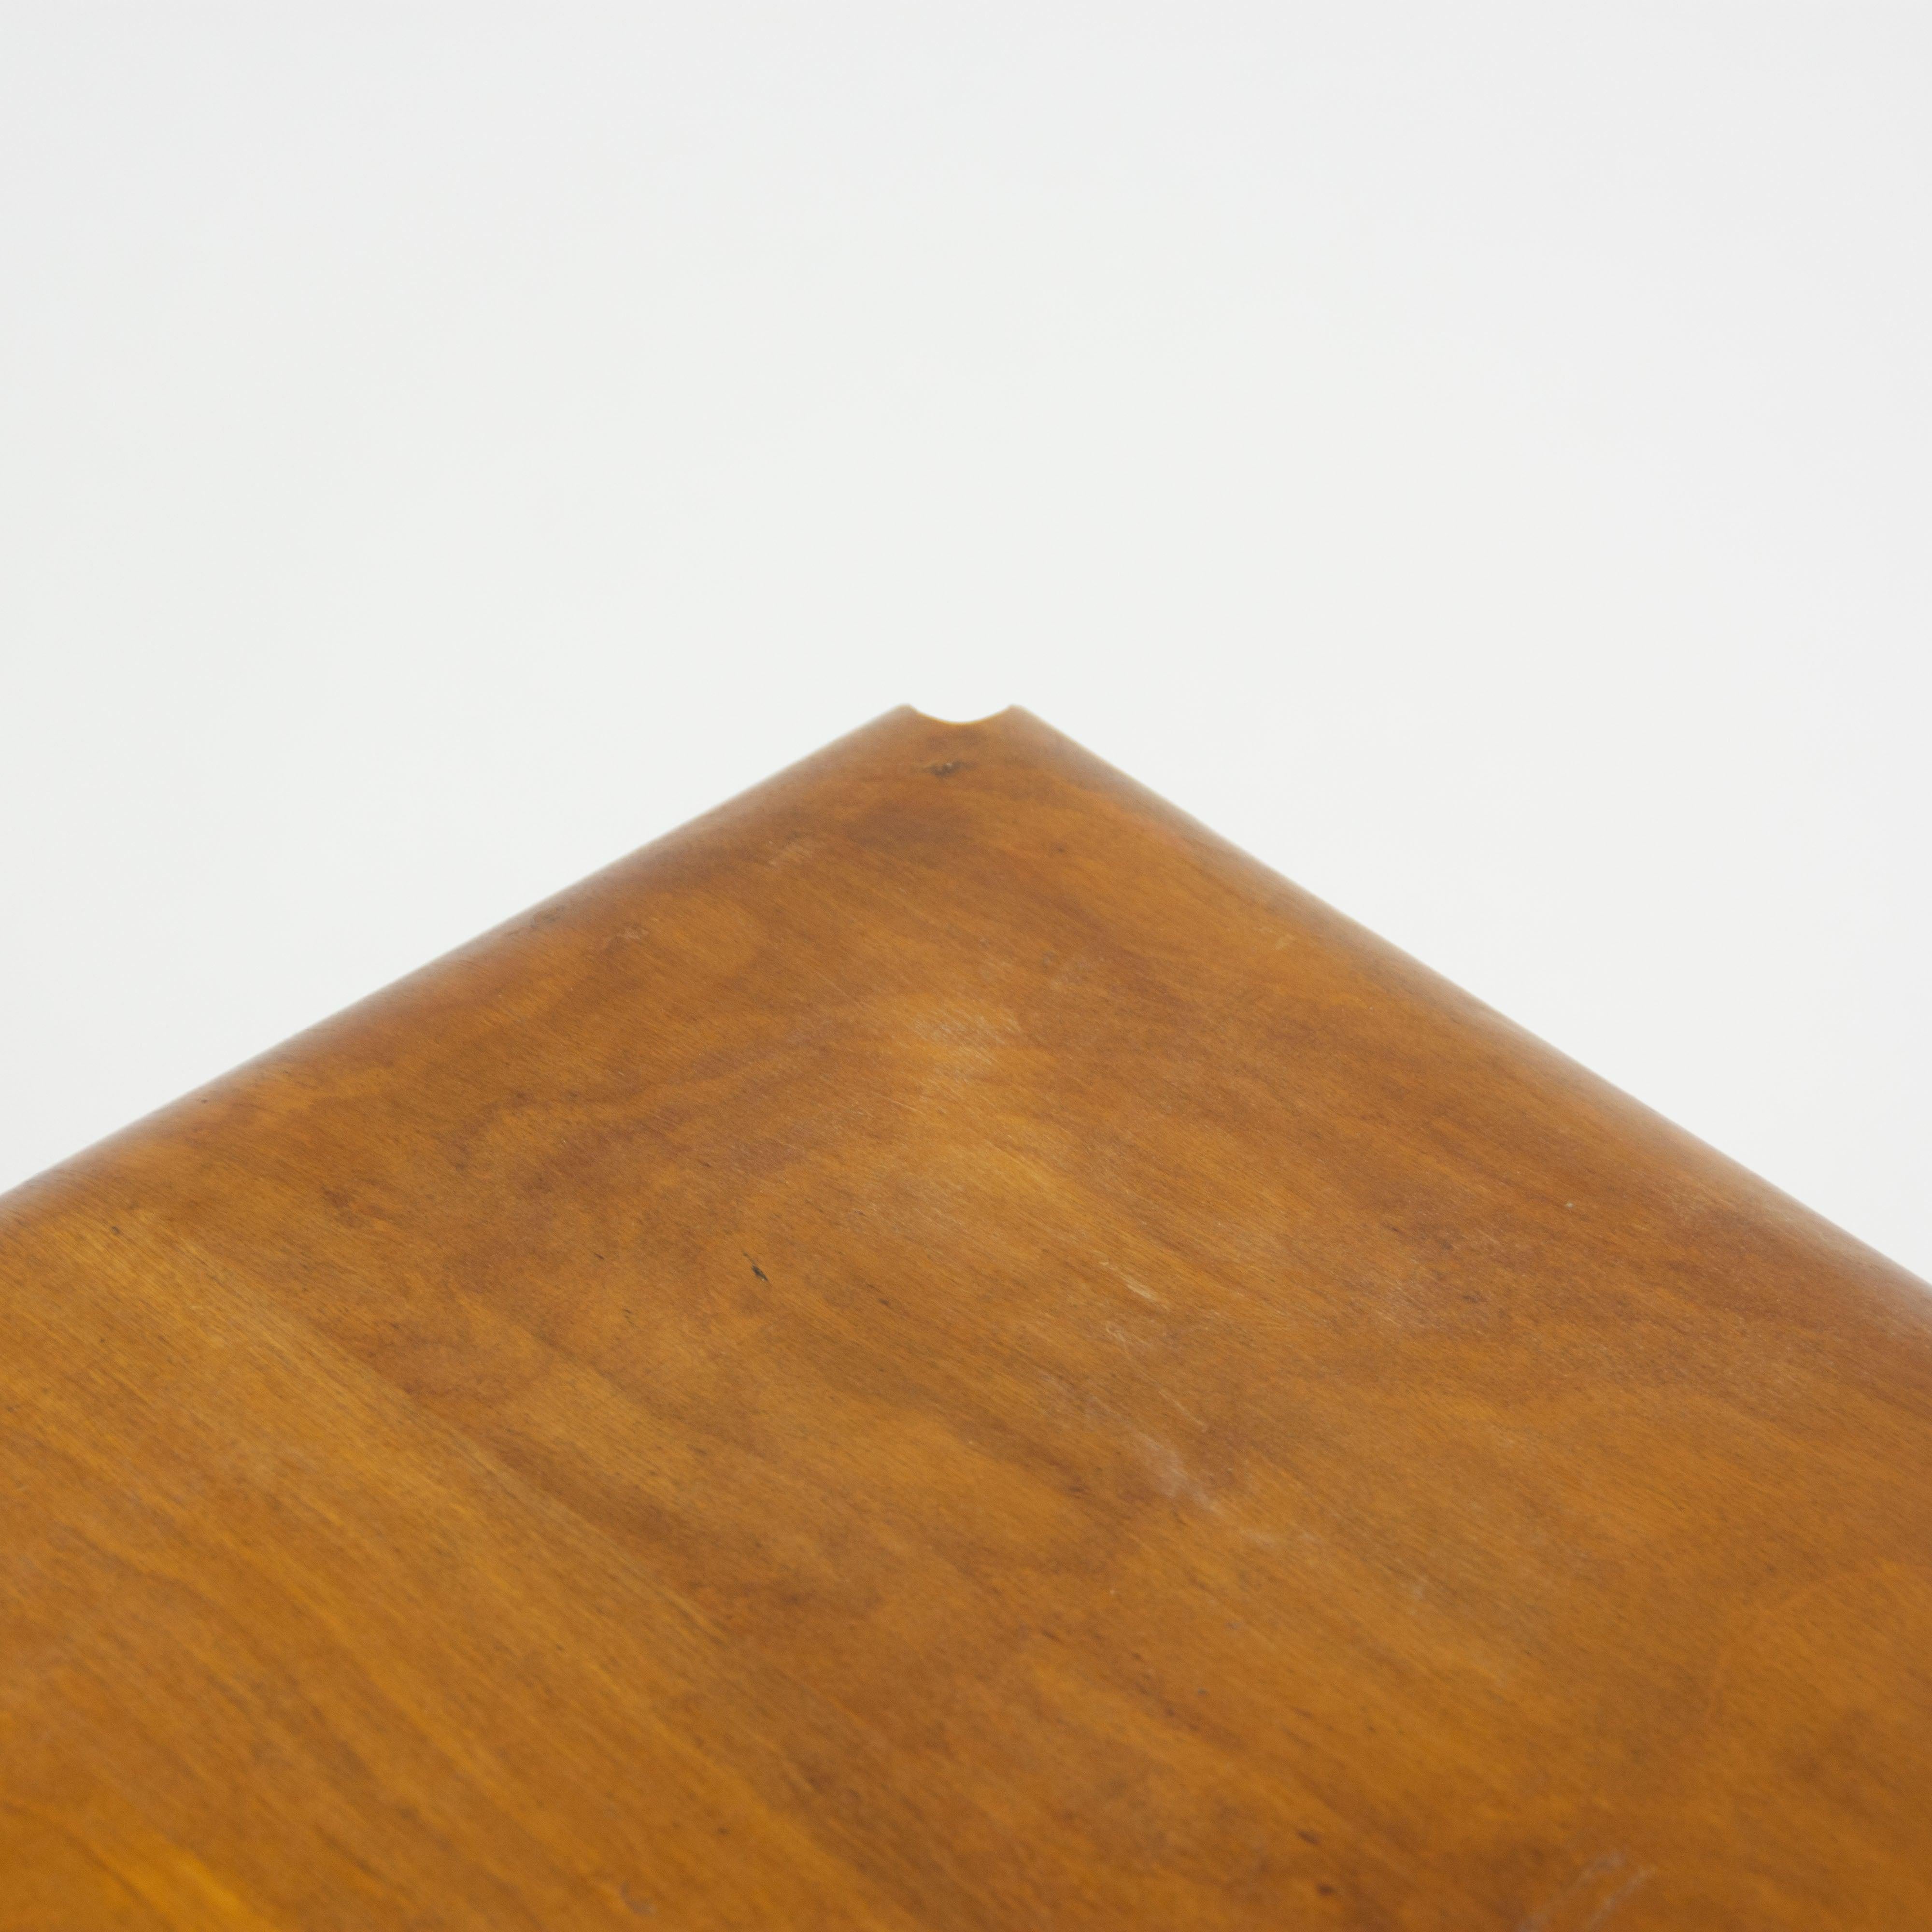 RARE Eames Evans Experimental Molded Plywood Coffee Table 1945 Pre Herman Miller In Good Condition For Sale In Philadelphia, PA